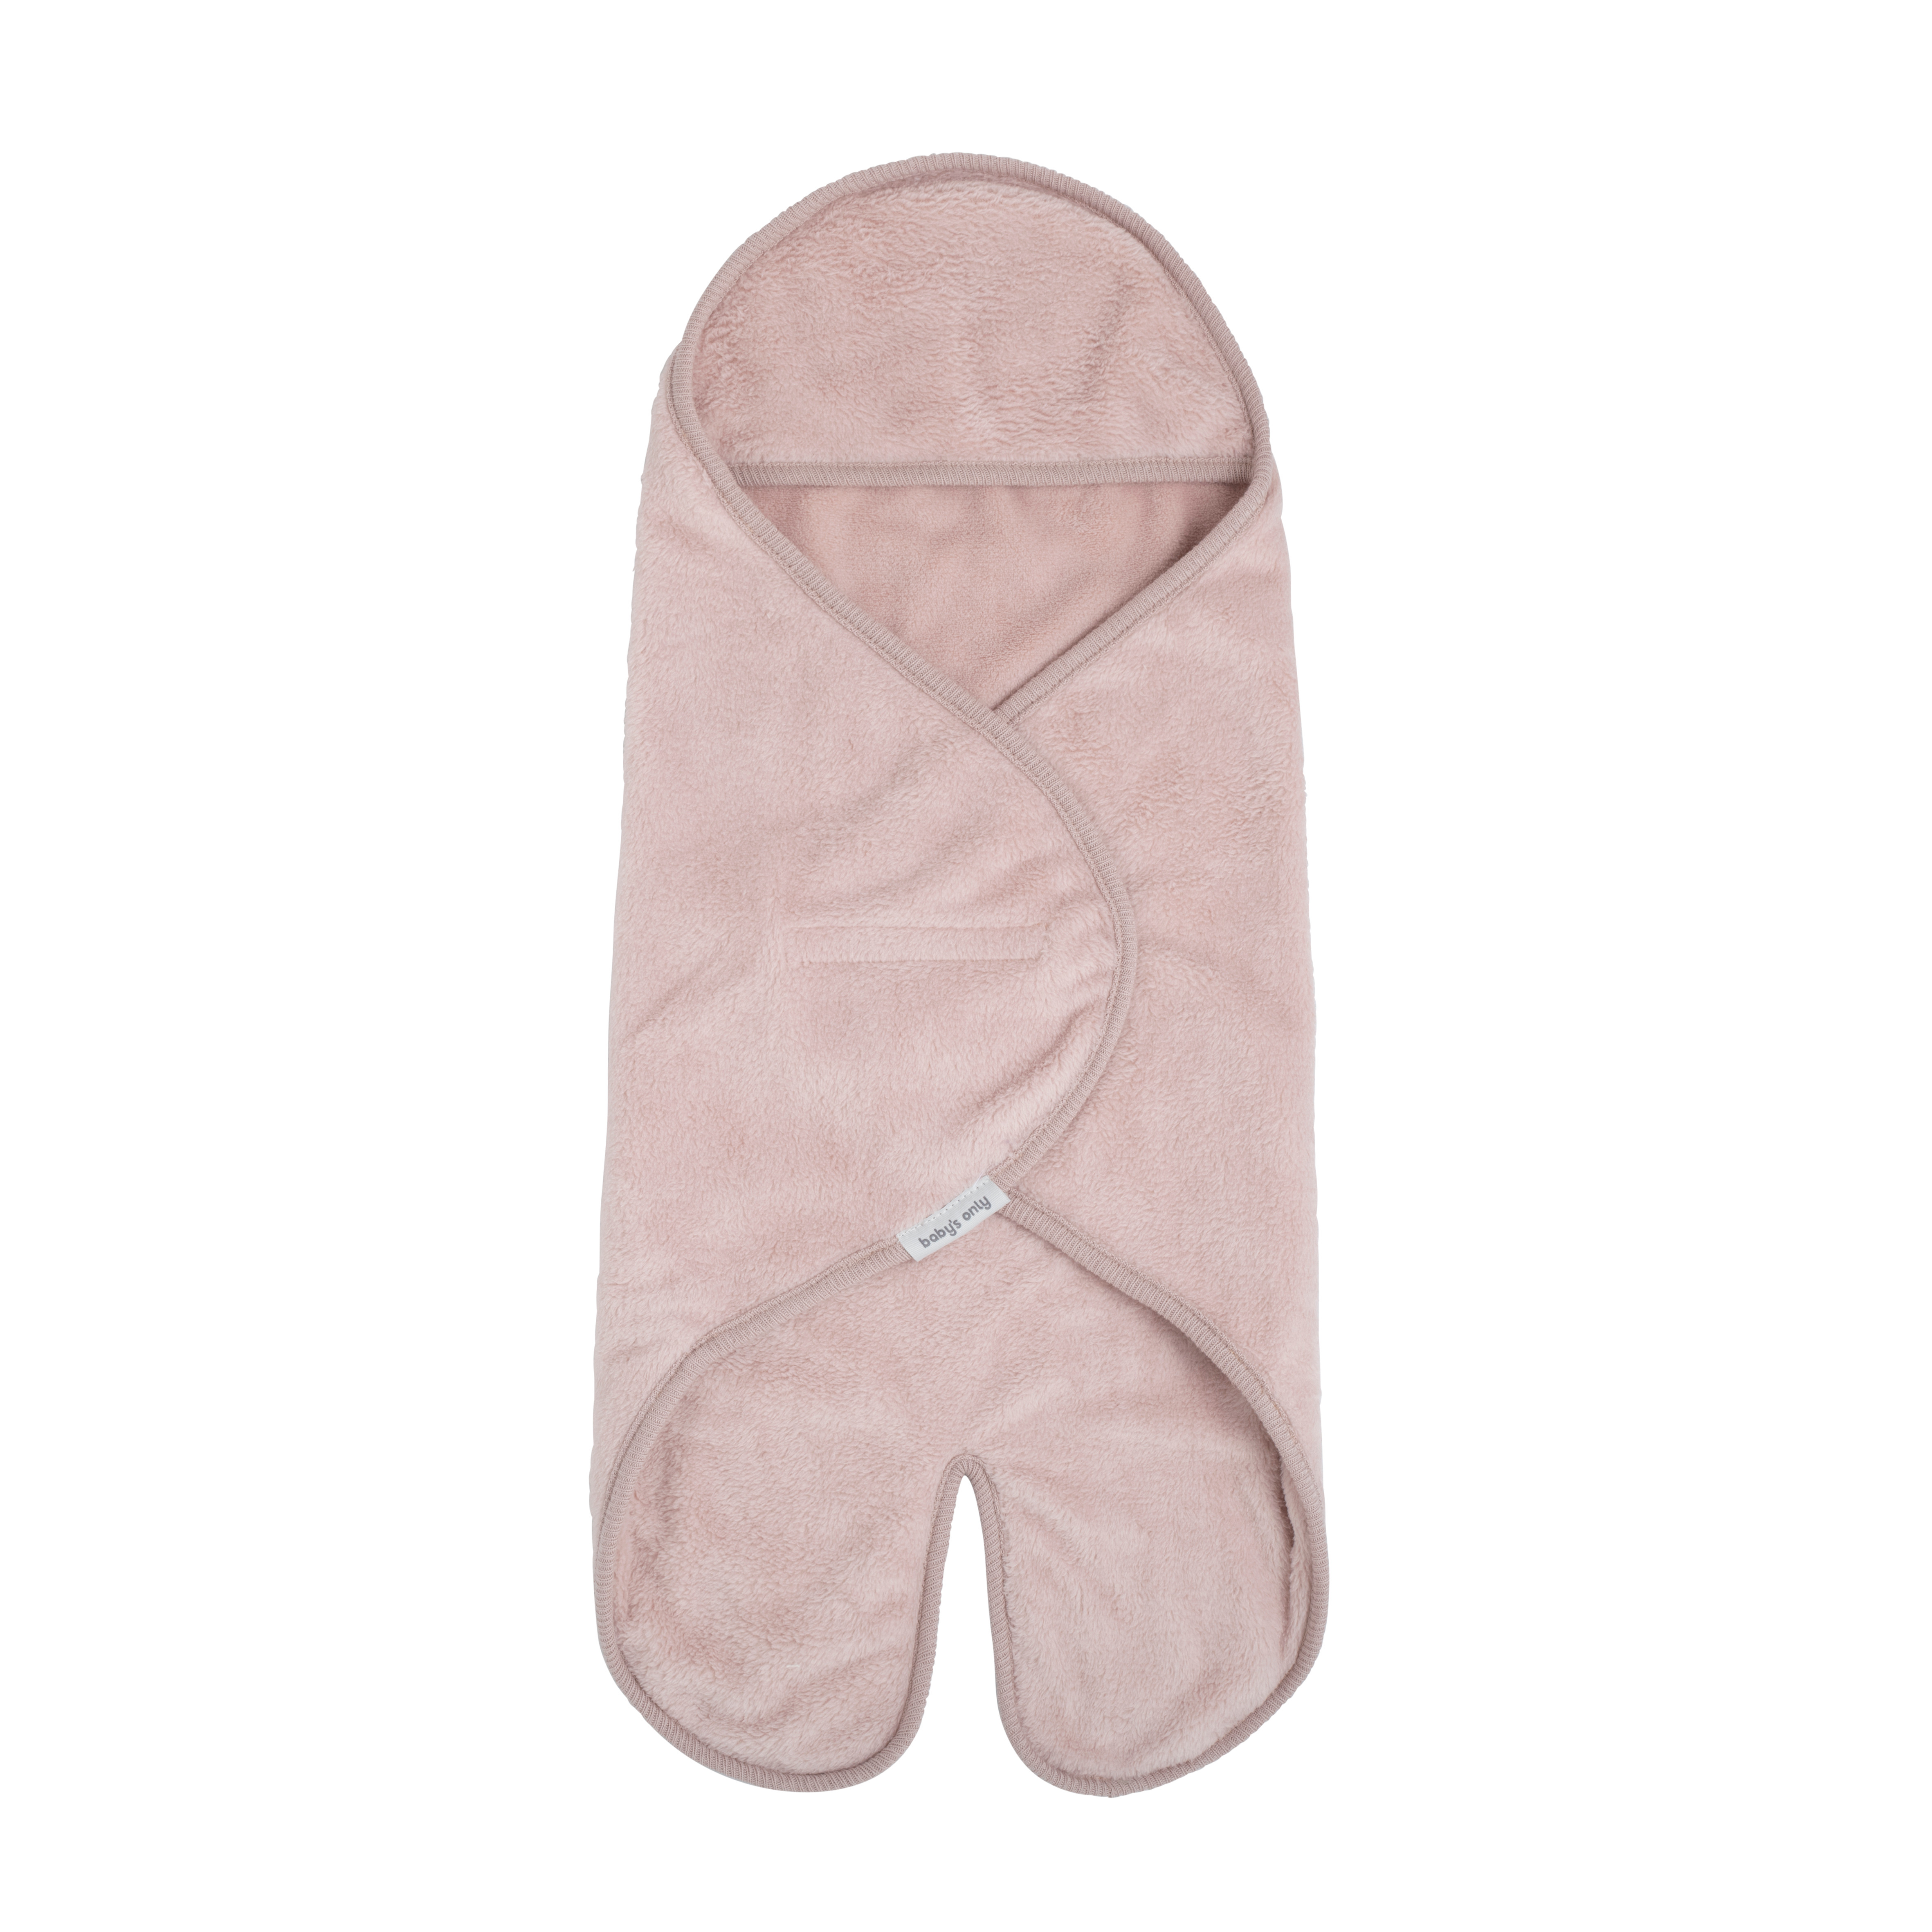 Hooded baby blanket with feet Cozy old pink